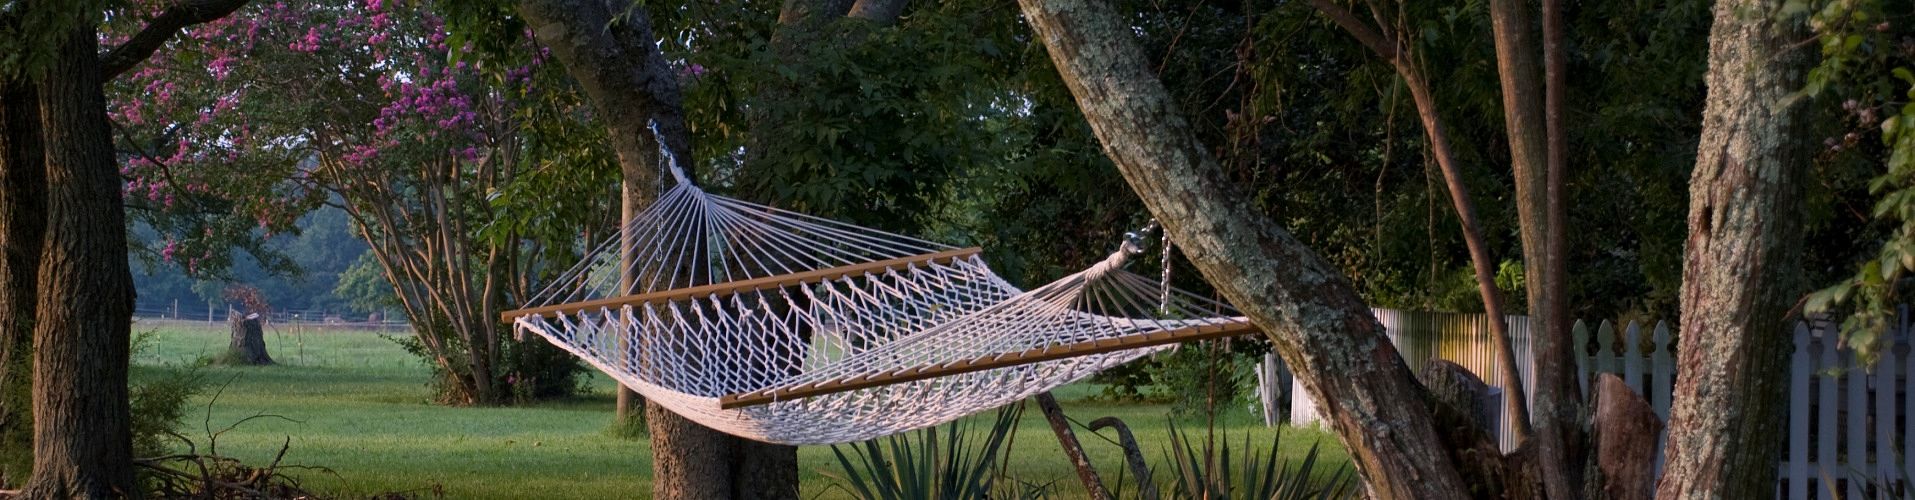 Hammock for relaxing at the ranch